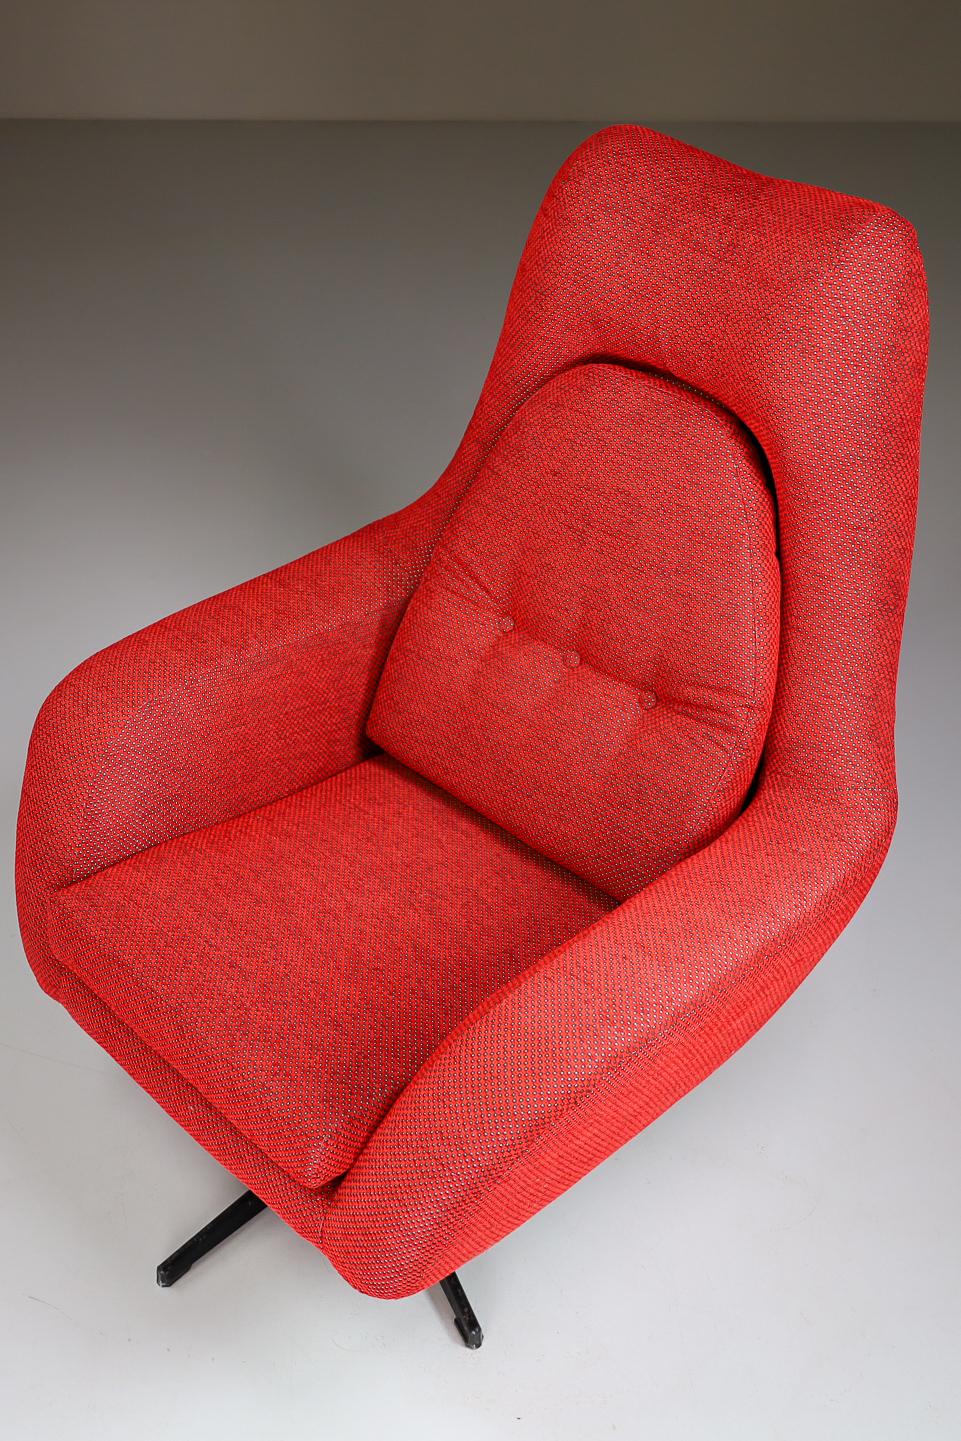 Pair of Swivel Chairs in New Reupholstered Red Fabric, Czech Republic 1970 For Sale 2